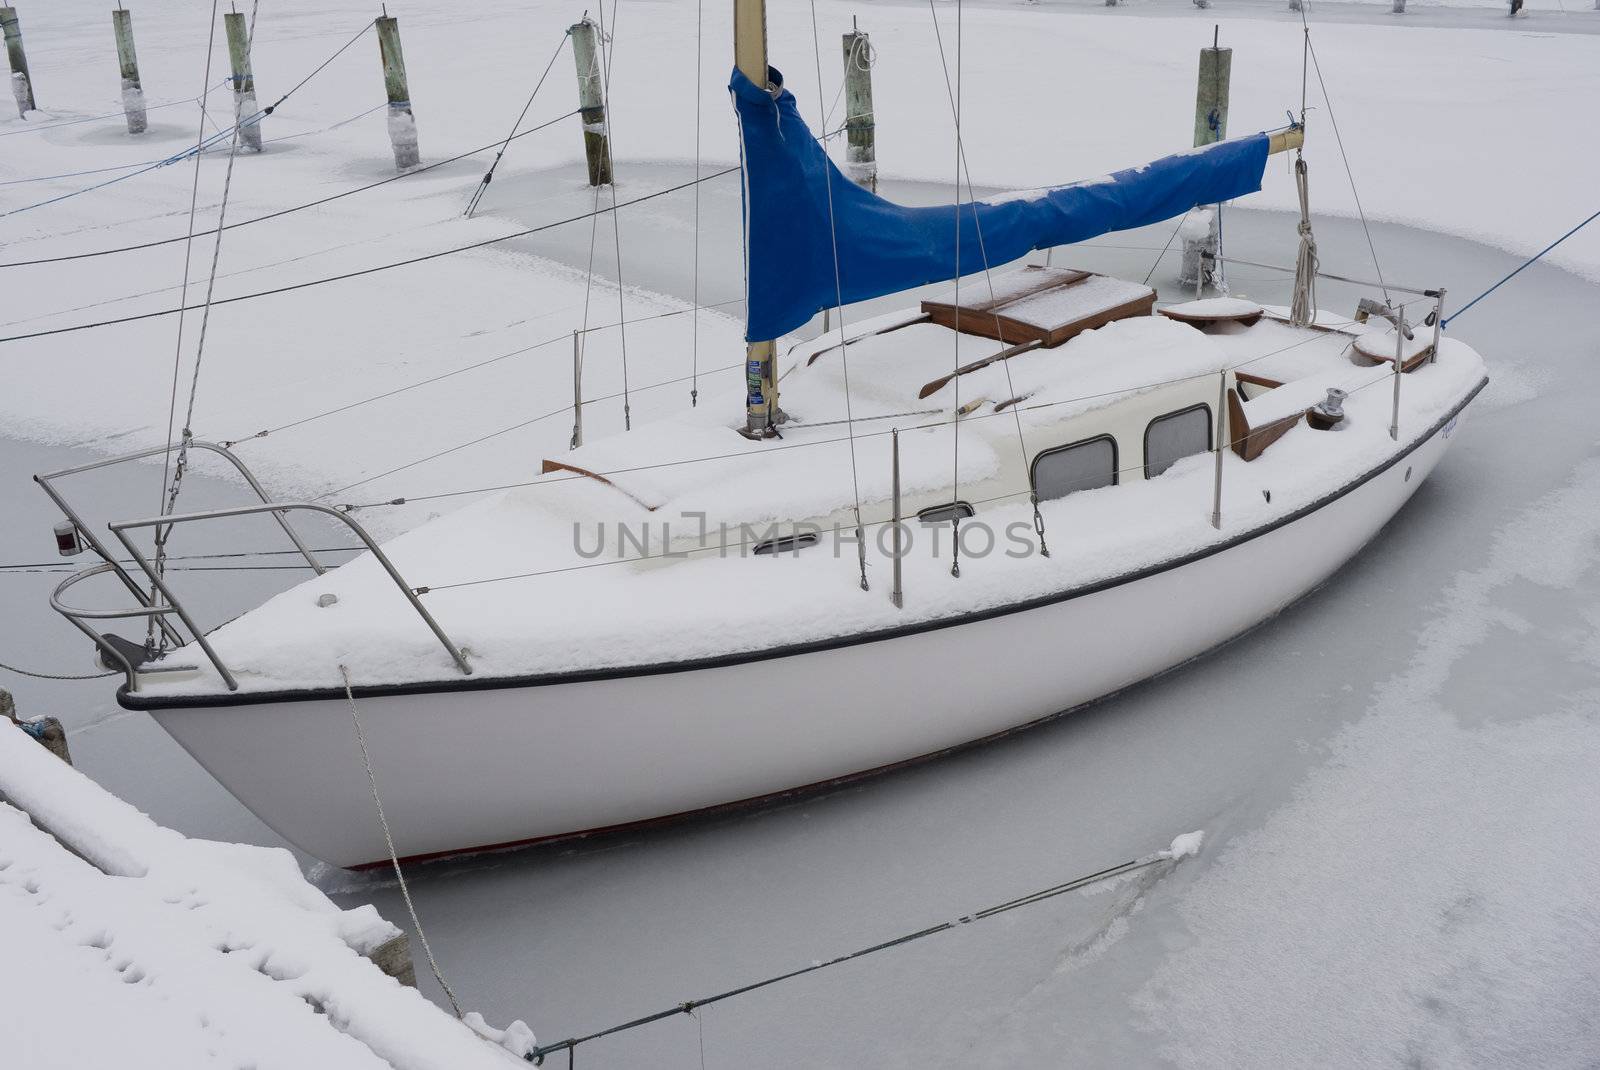 Icebound sailing boat in the marina of Nyborg, Denmark on a cold January day.